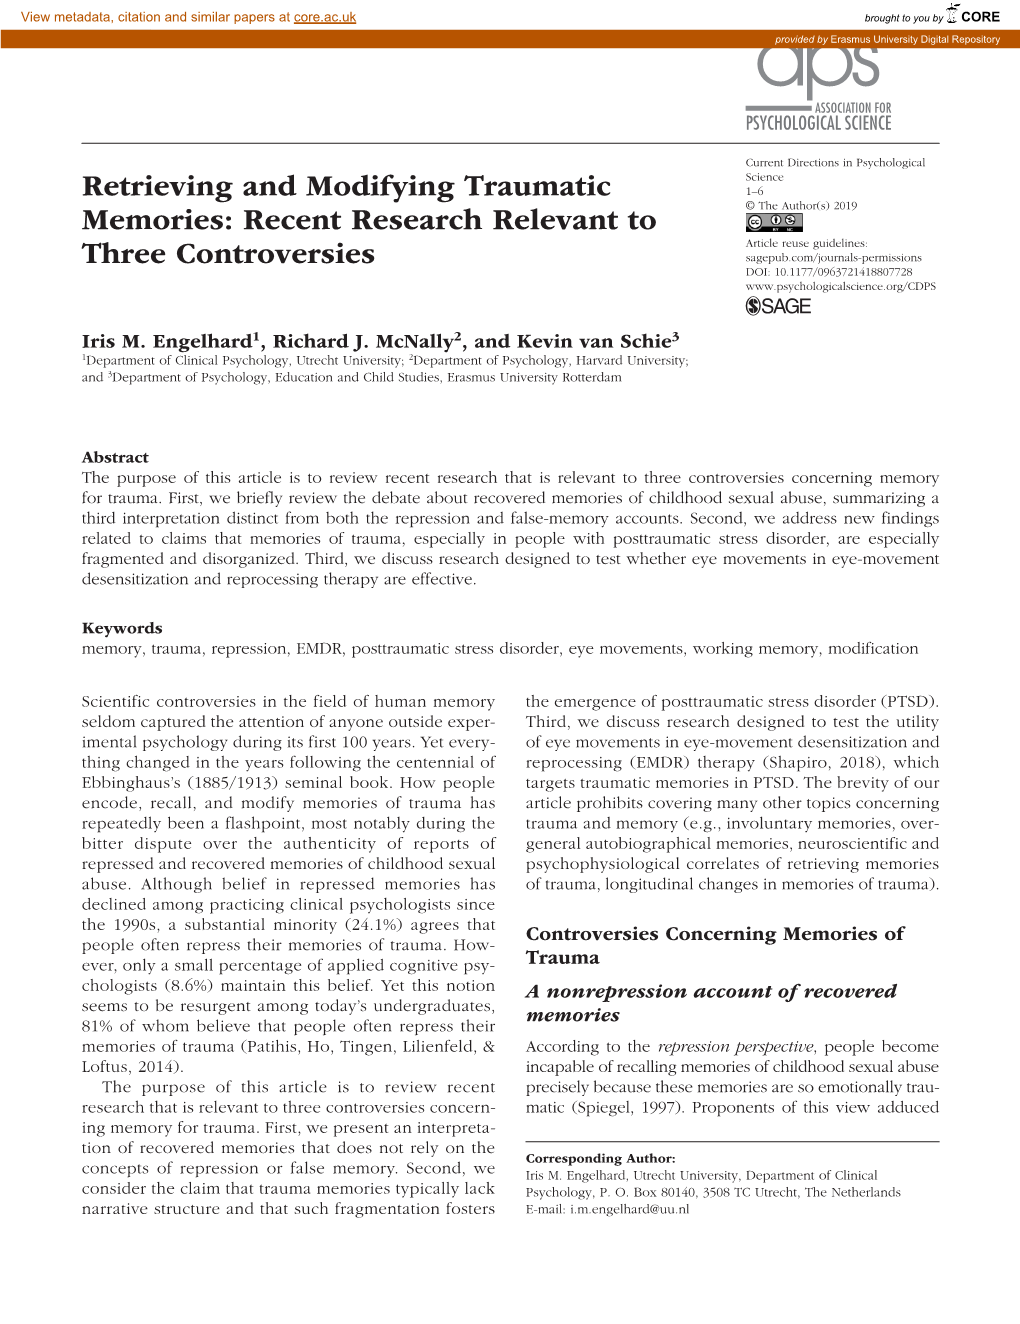 Retrieving and Modifying Traumatic Memories: Recent Research Relevant to Three Controversies